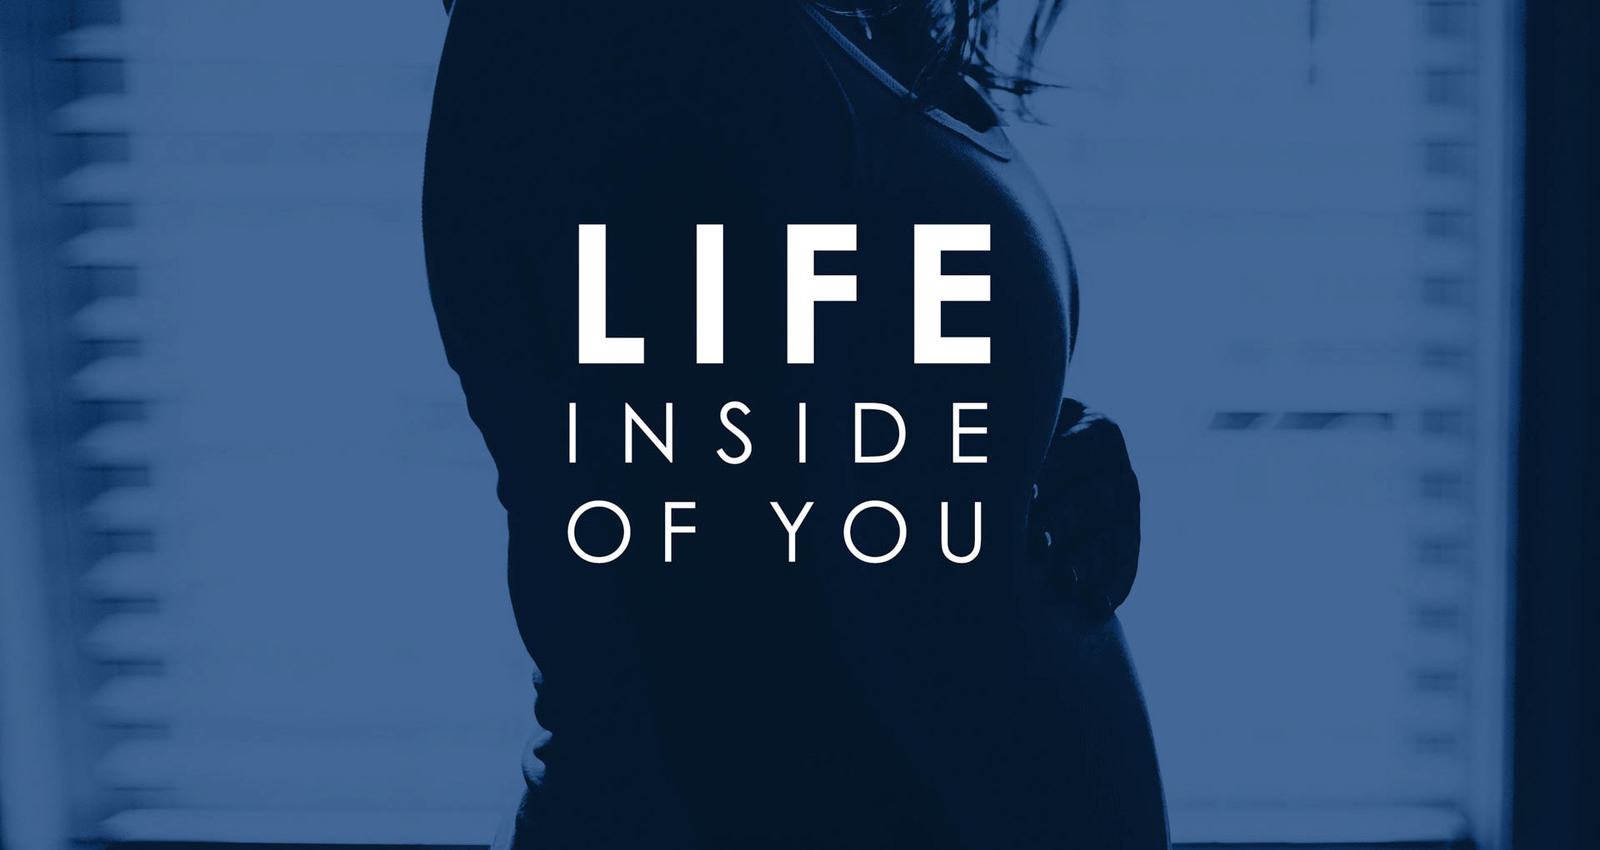 Life Inside Of You